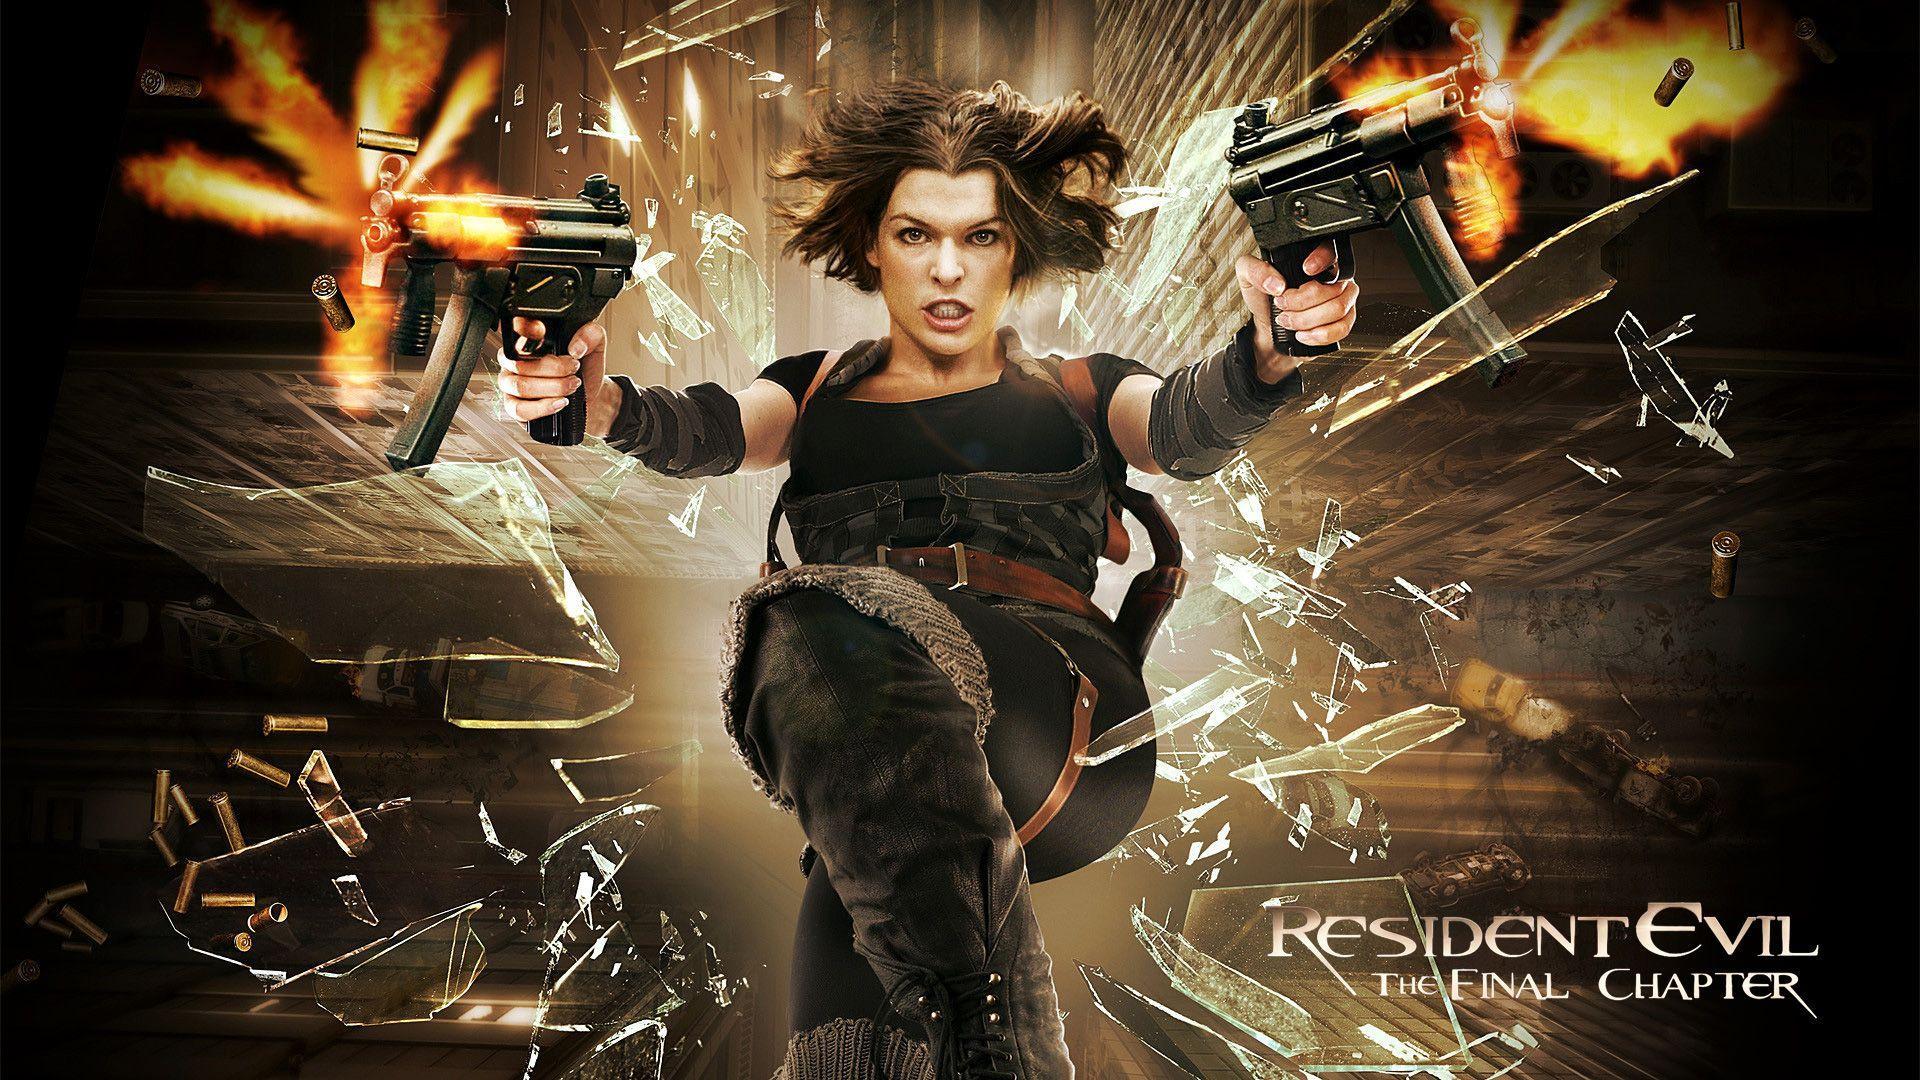 Resident Evil The Final Chapter Movie HD Wallpapers